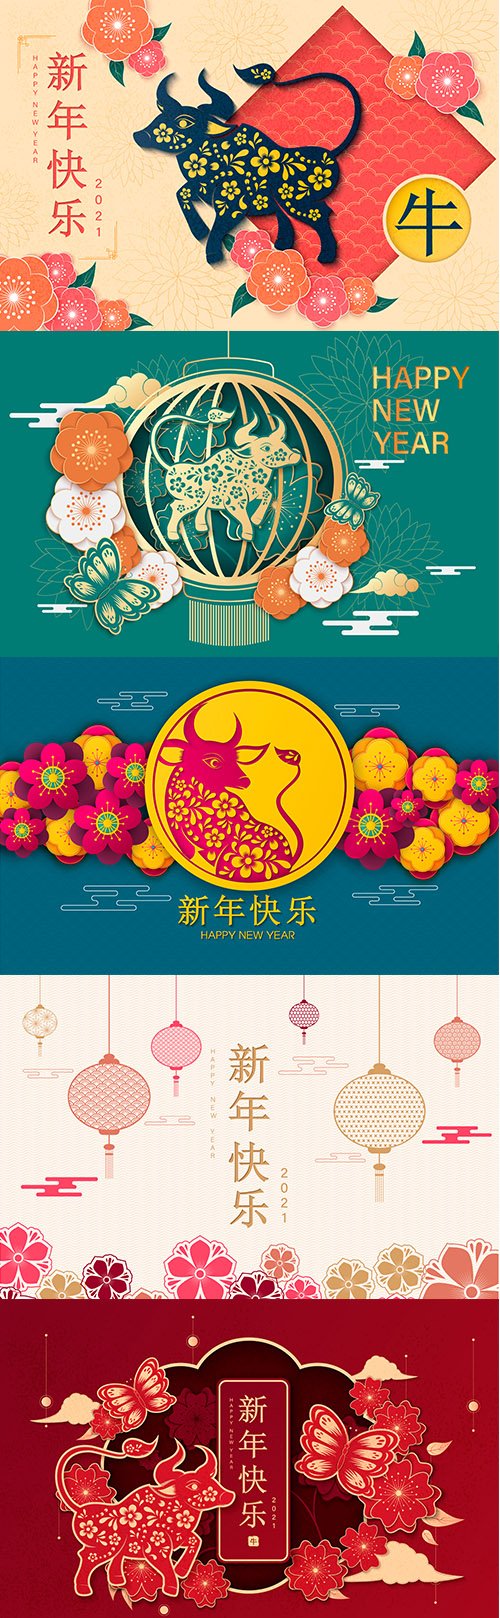 Happy new year flower asian elements with craft style background